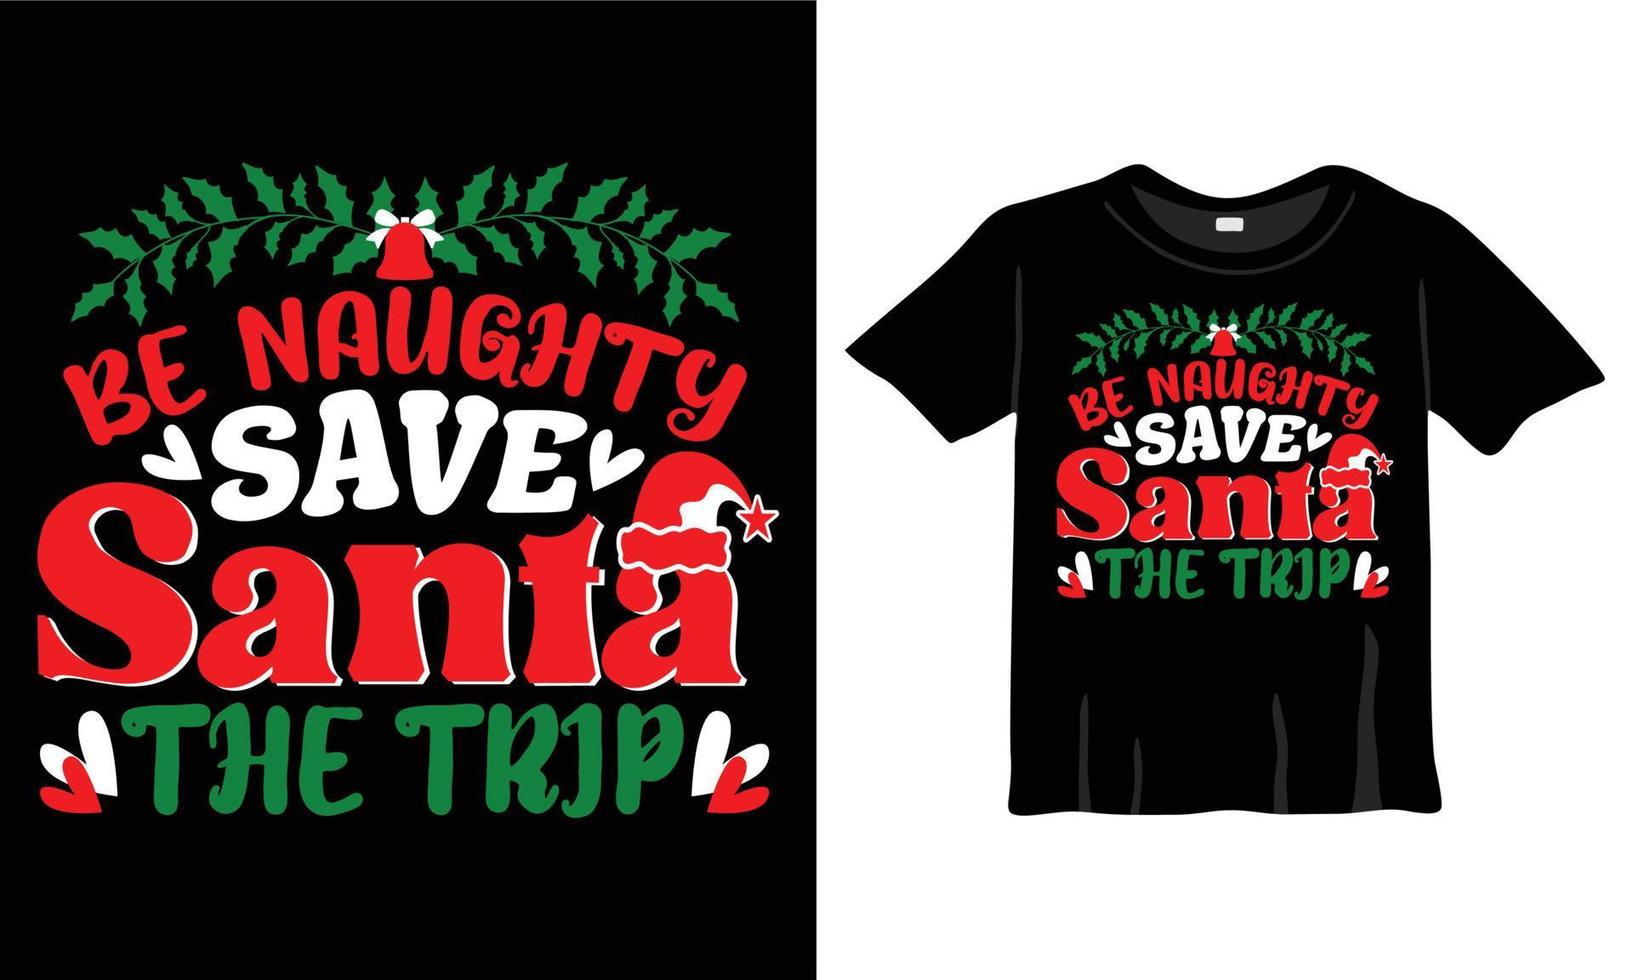 Be Naughty Save Santa The Trip Christmas T-Shirt Design Template for Christmas Celebration. Good for Greeting cards, t-shirts, mugs, and gifts. For Men, Women, and Baby clothing vector